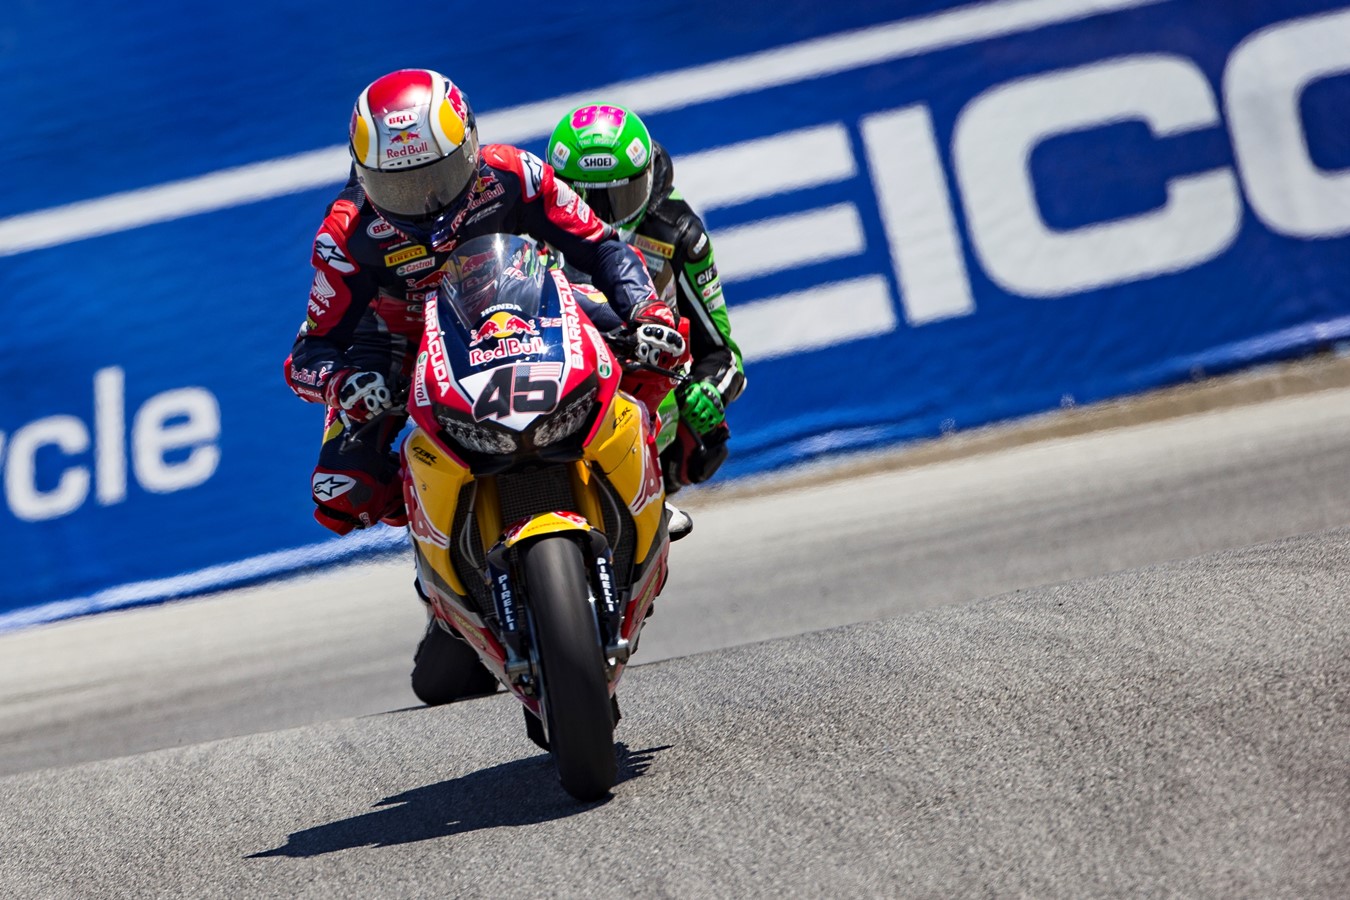 Bradl and Gagne battle hard at Laguna in race two